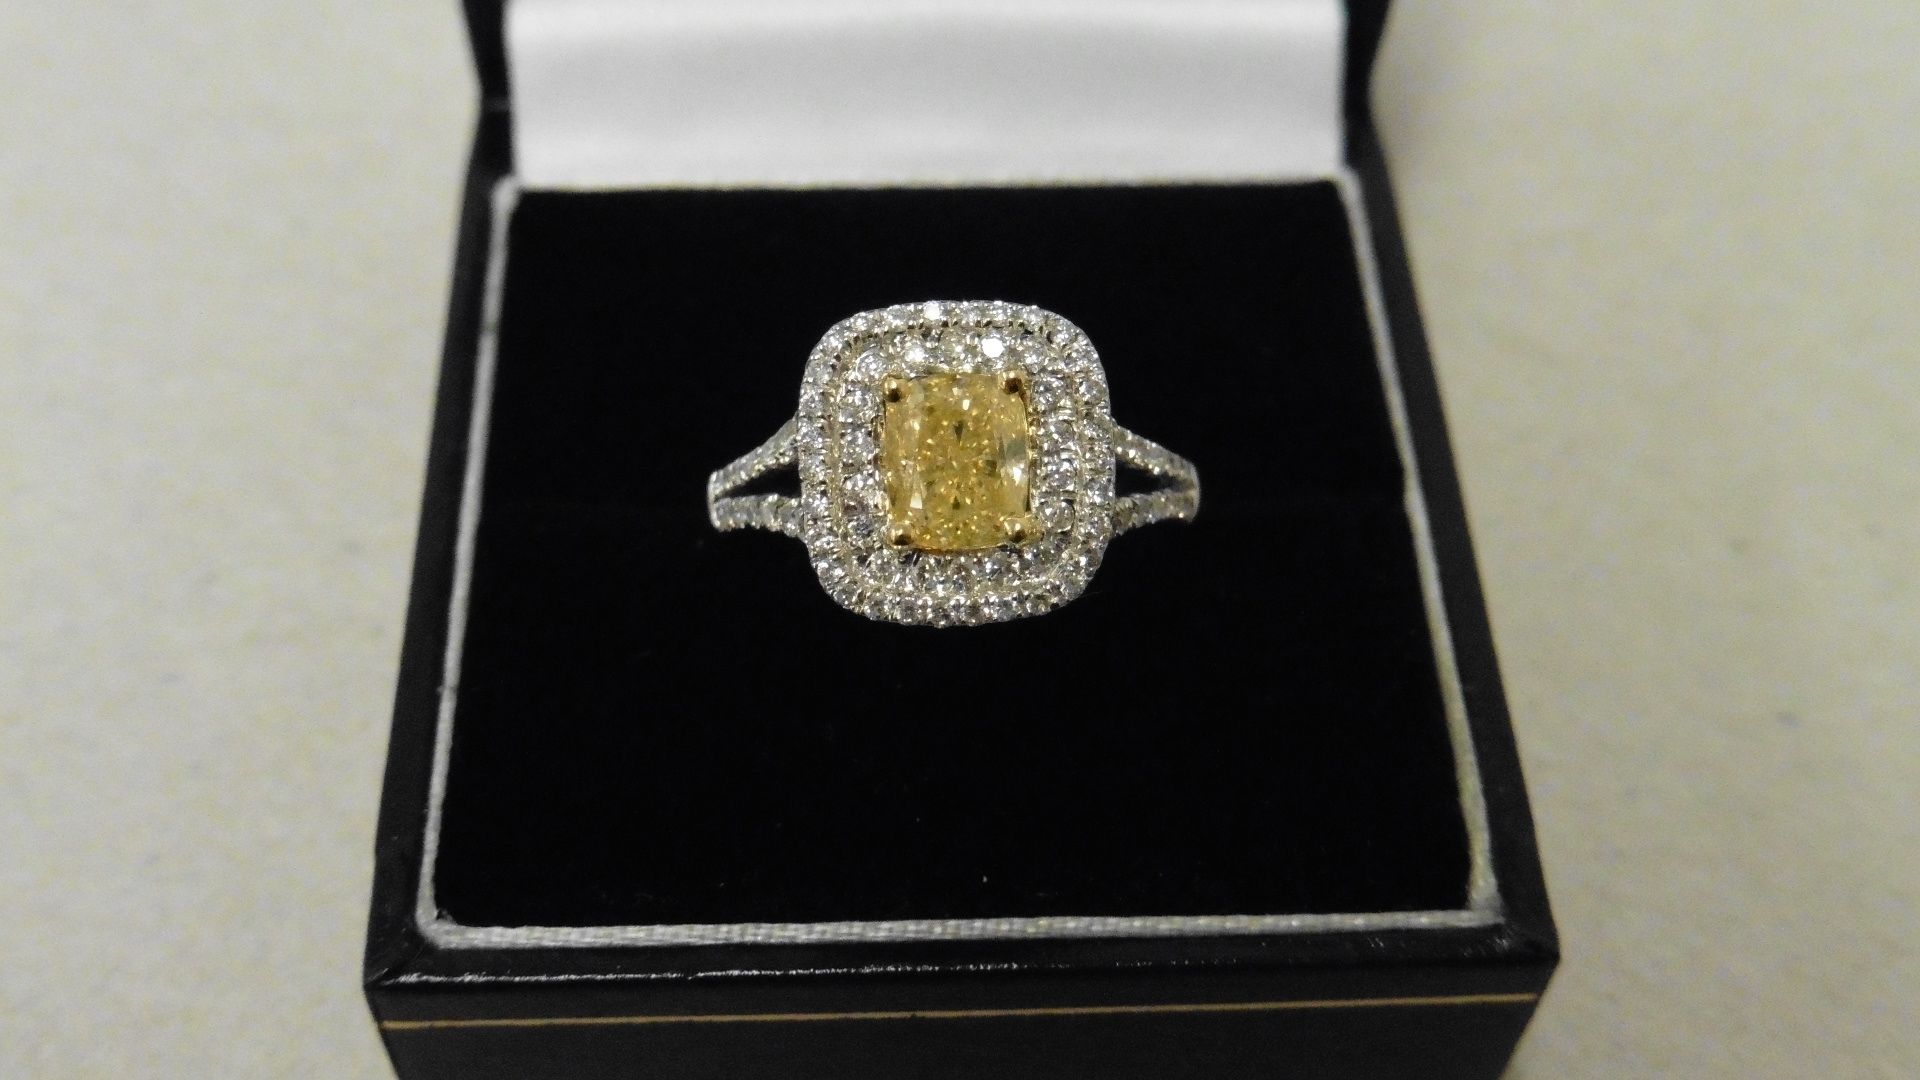 1.13ct diamond set solitaire ring. Yellow cushion cut diamond,Fancy yellow/green, Si1 clarity on GIA - Image 4 of 5